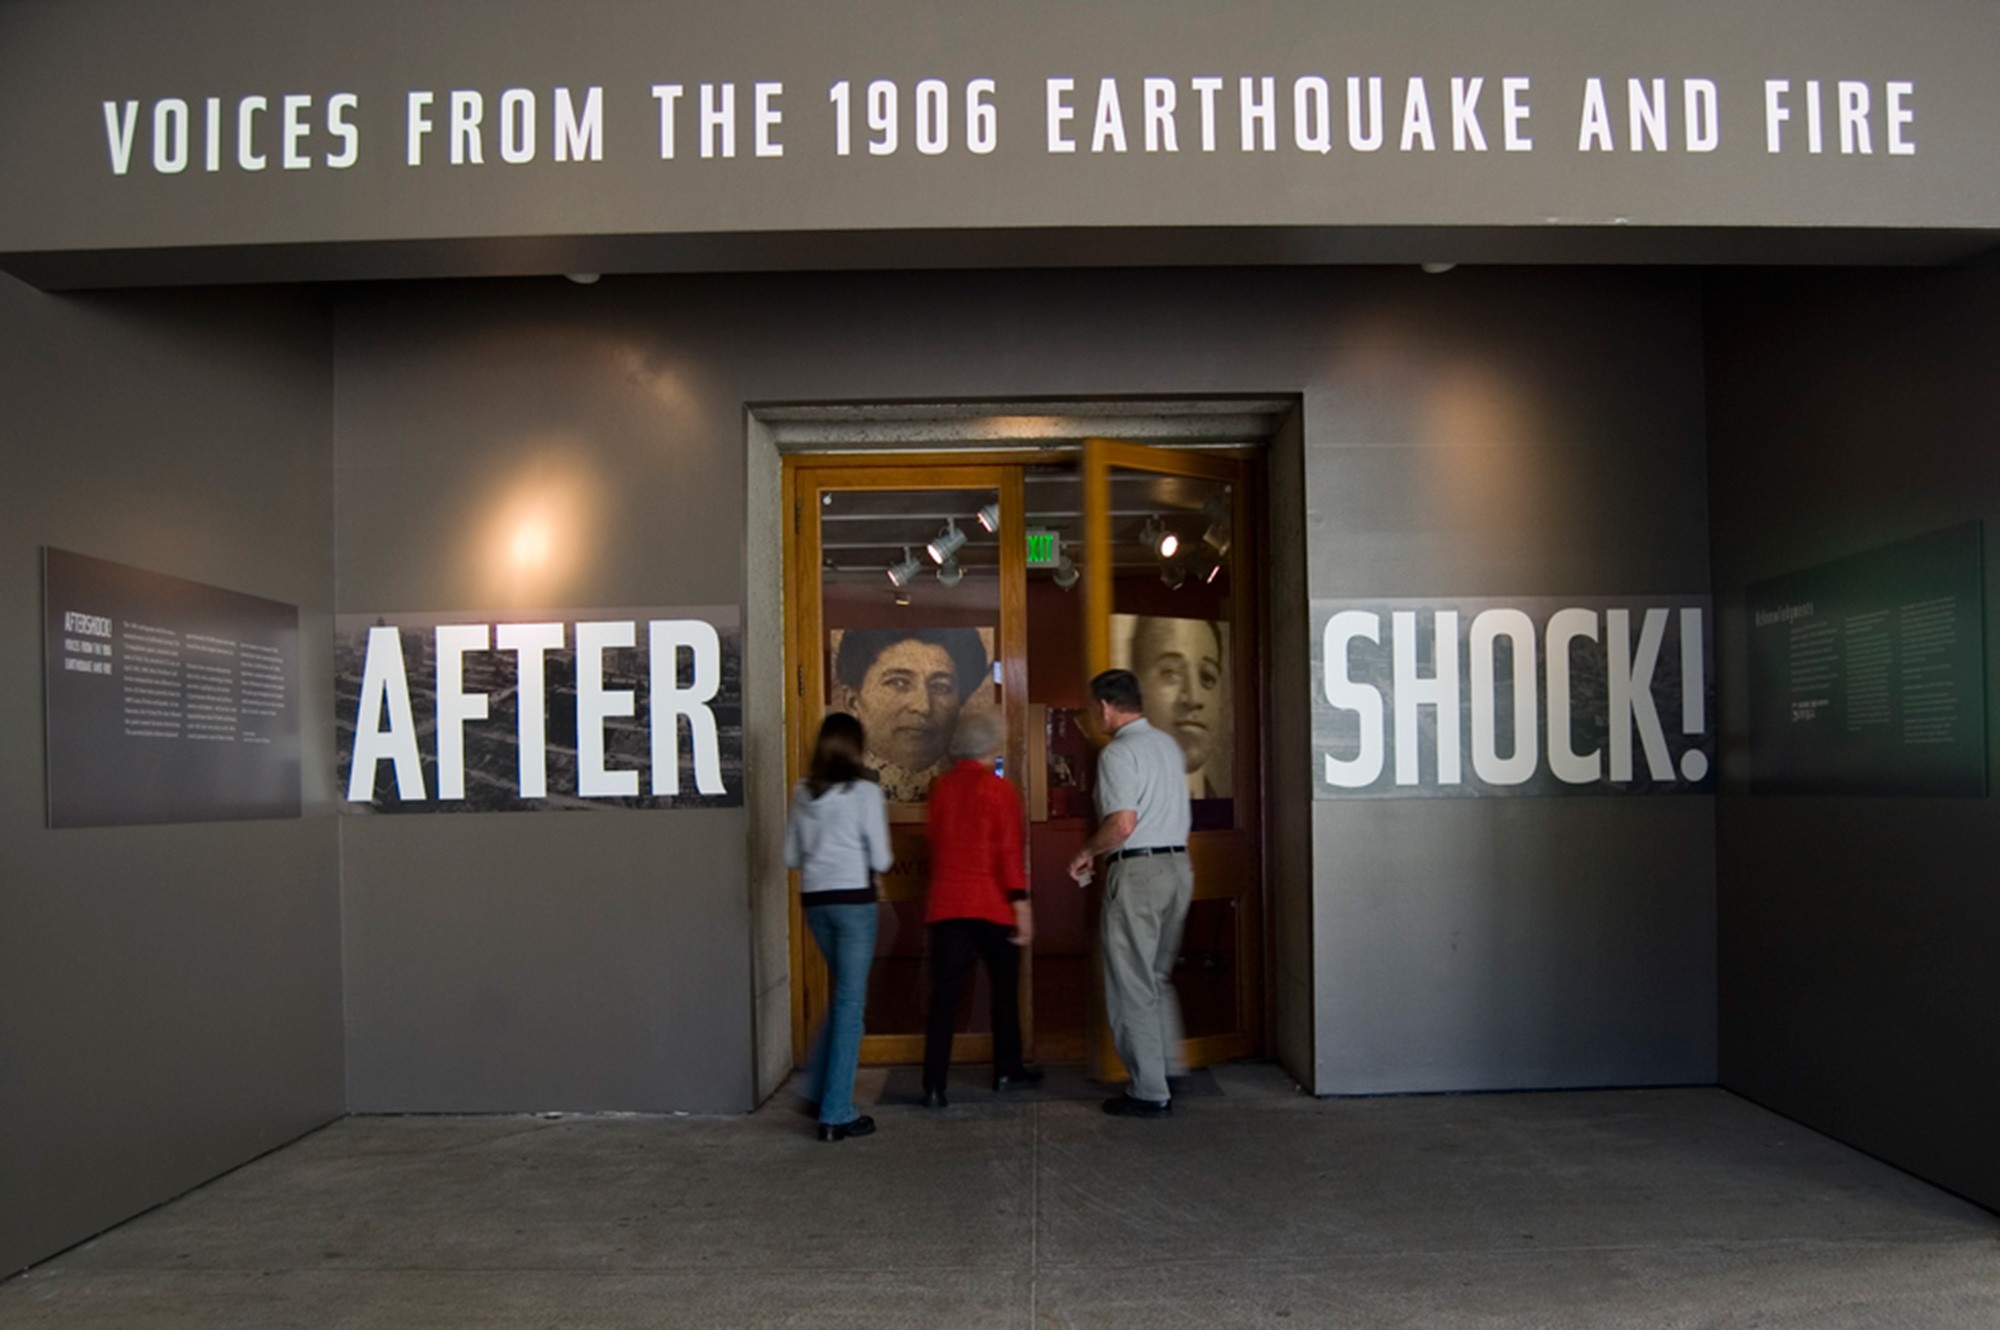 Aftershock! Voices from the 1906 Earthquake and Fire